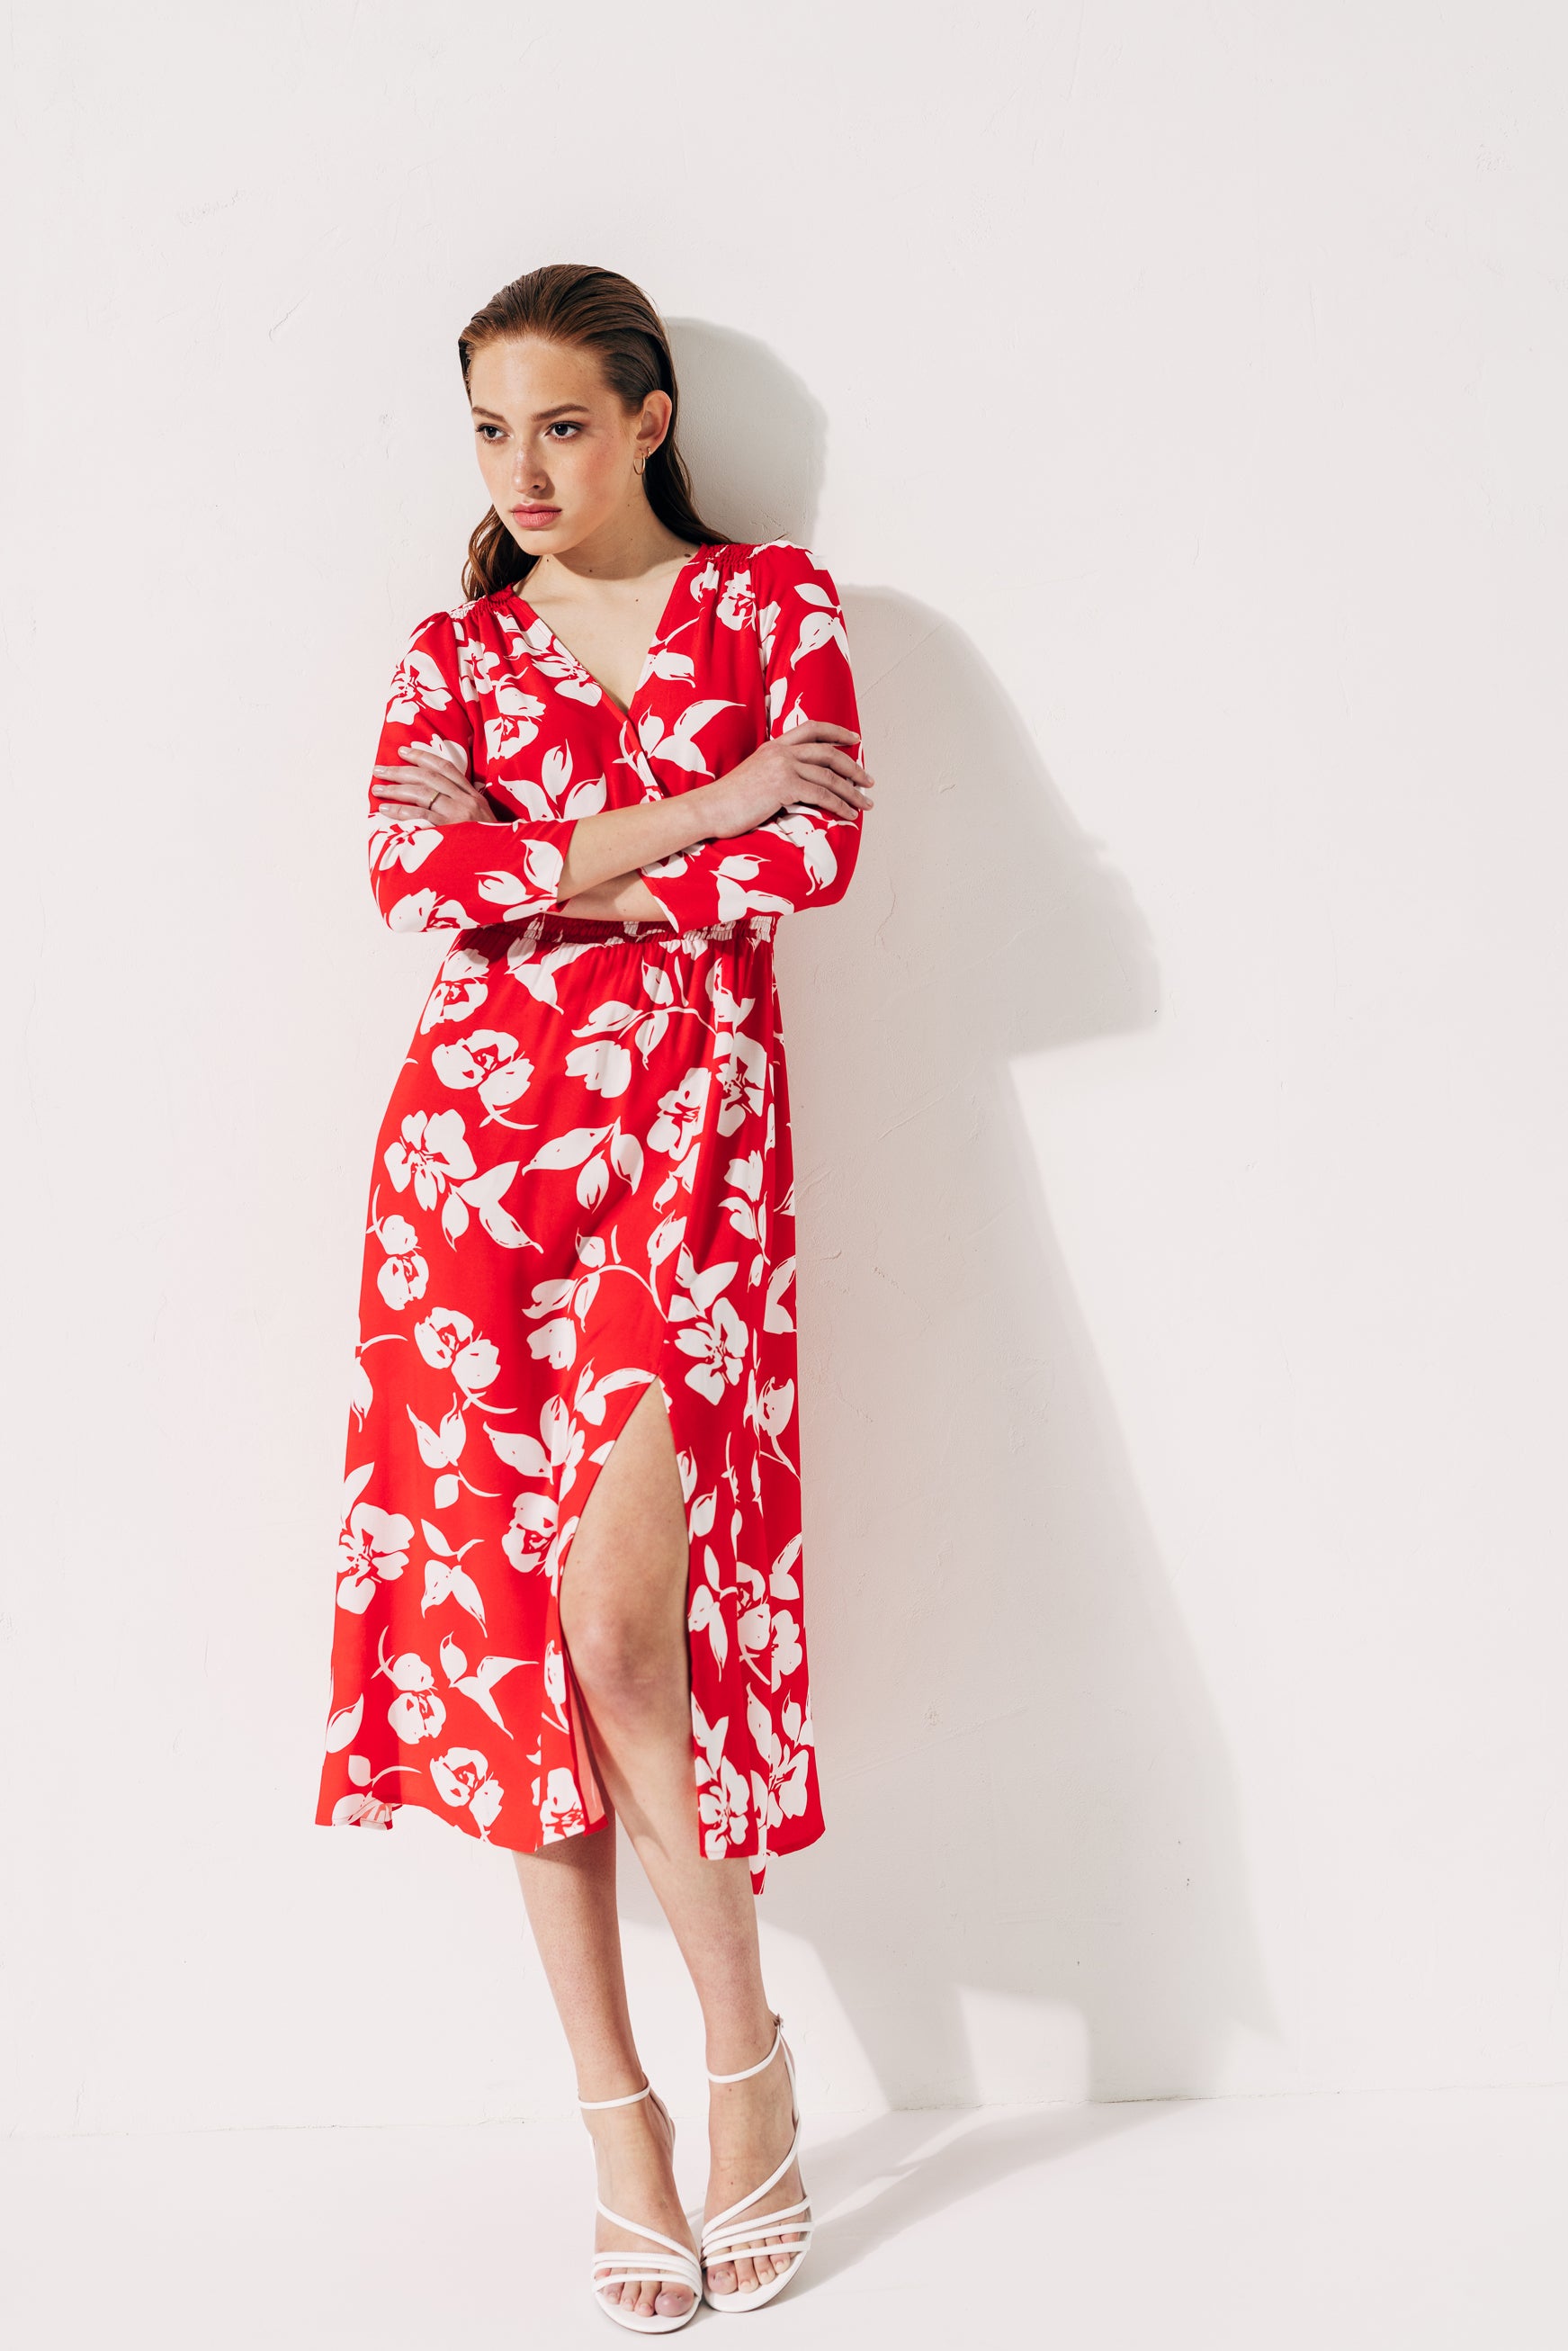 100% Viscose floral print midi dress with 3/4 sleeves and V-neckline